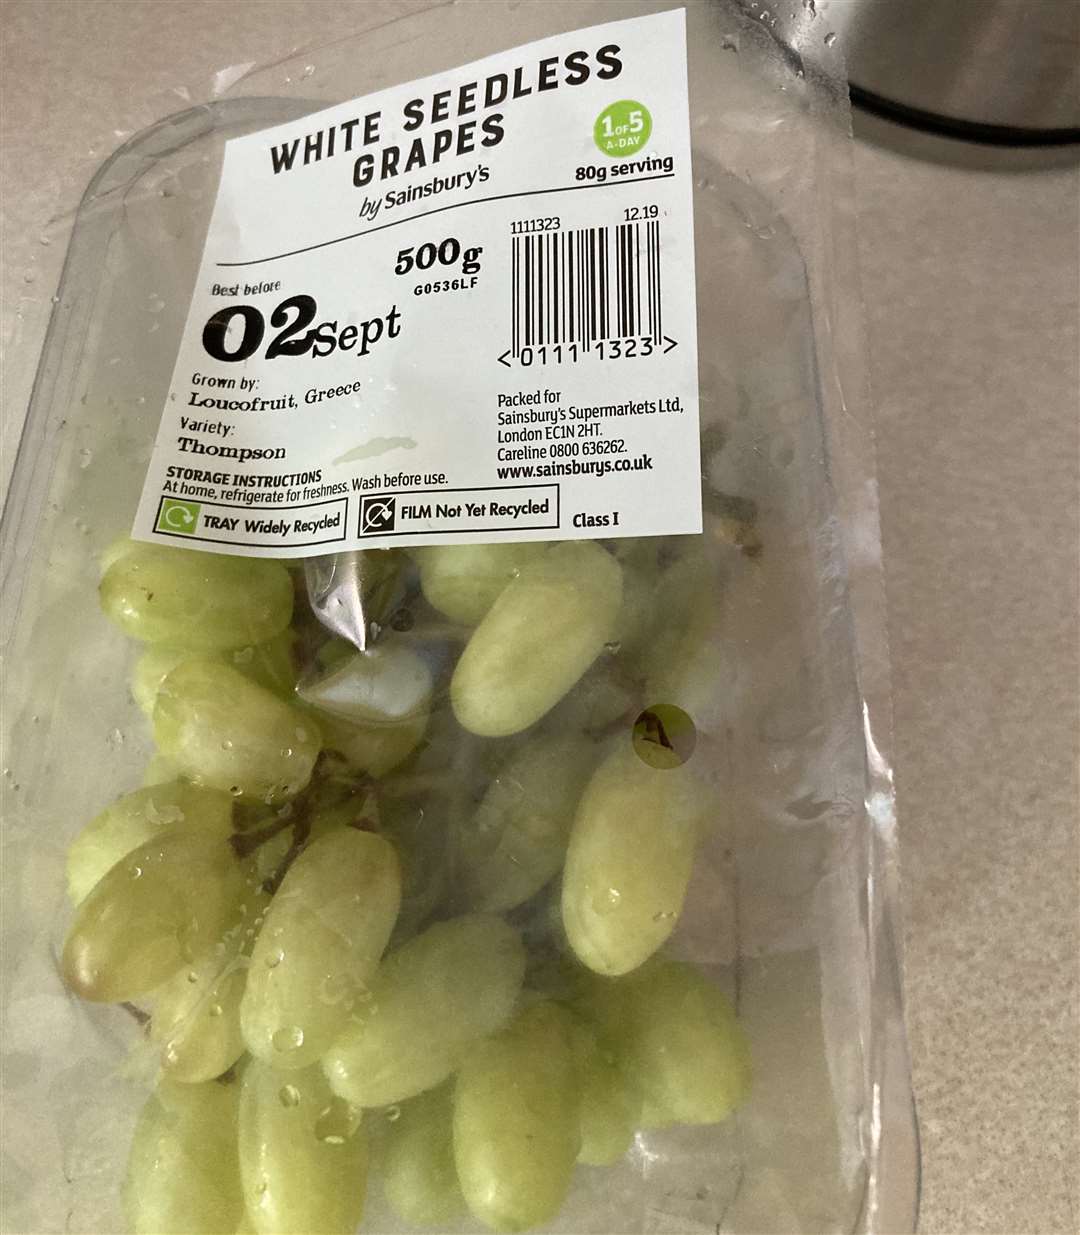 The Sainsbury's grapes, packaged in Greece